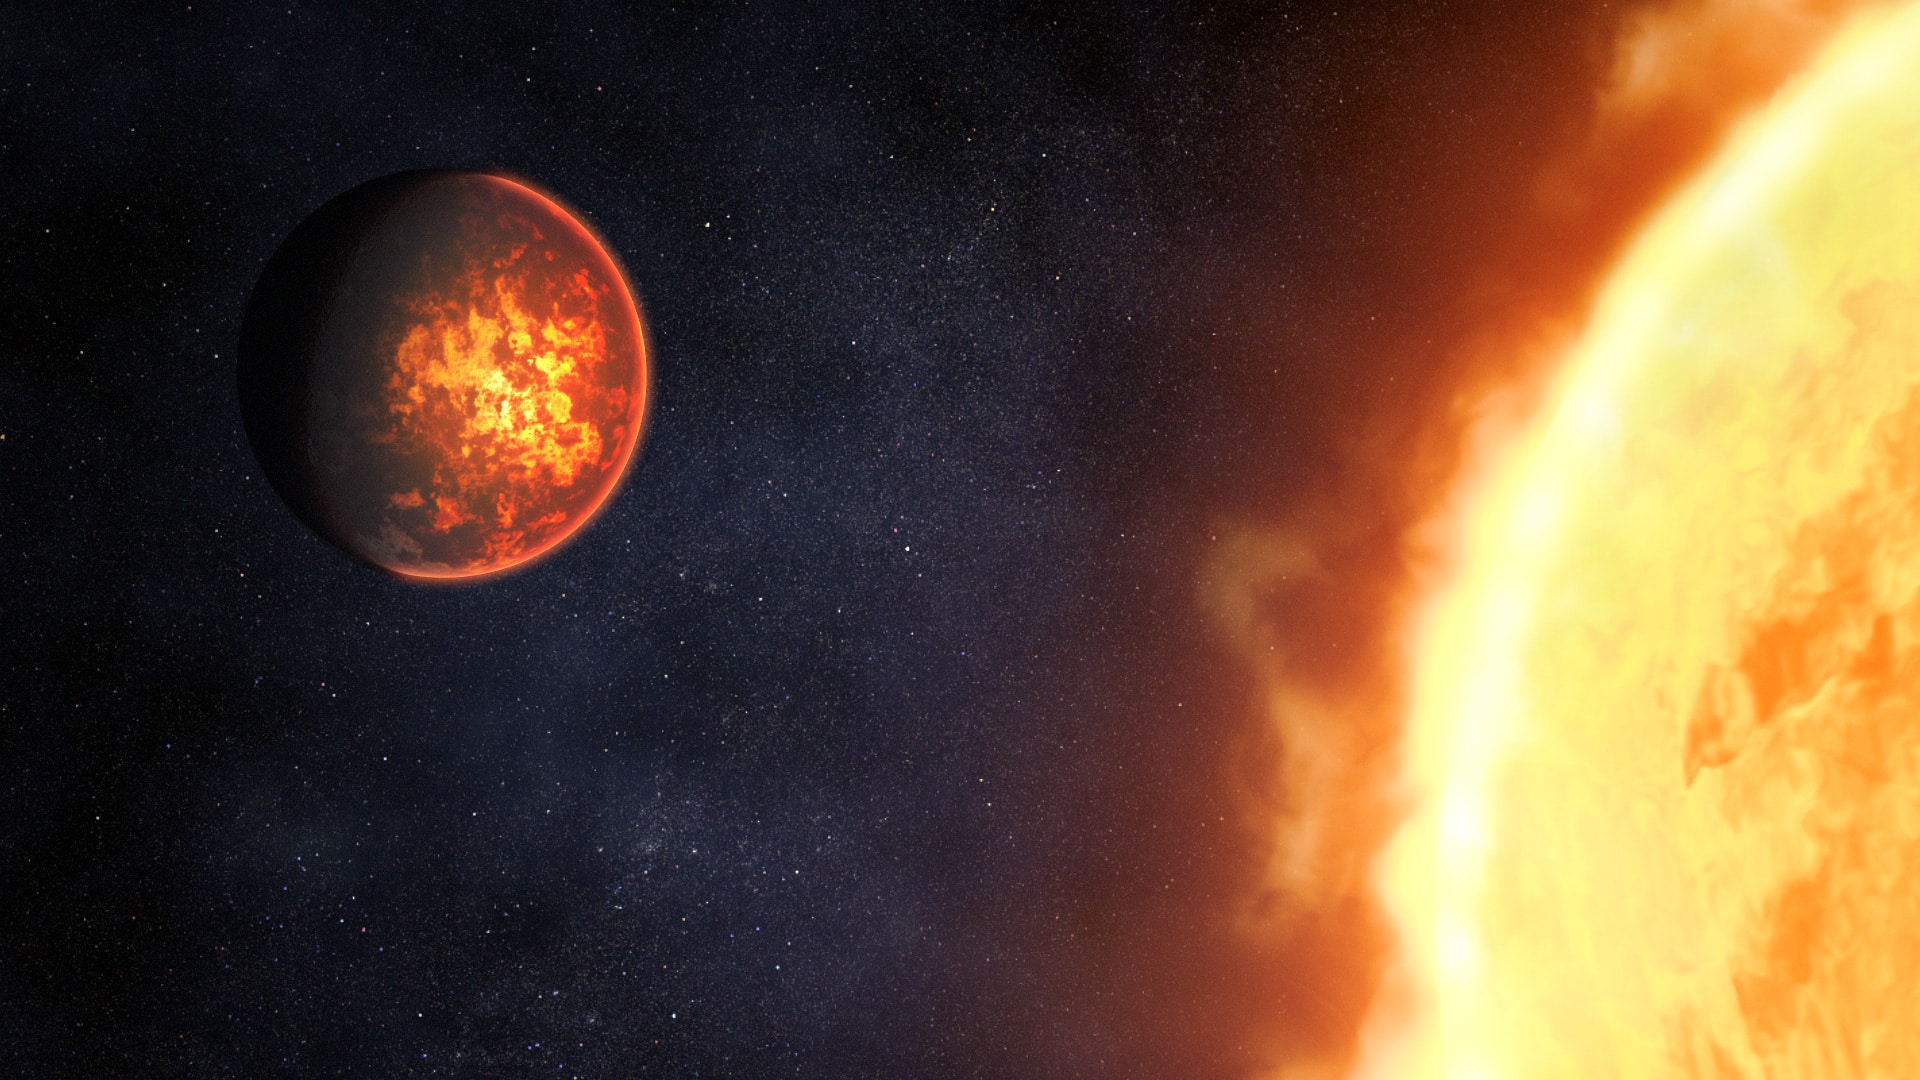 Illustration of Exoplanet 55 Cancri e and Its Star